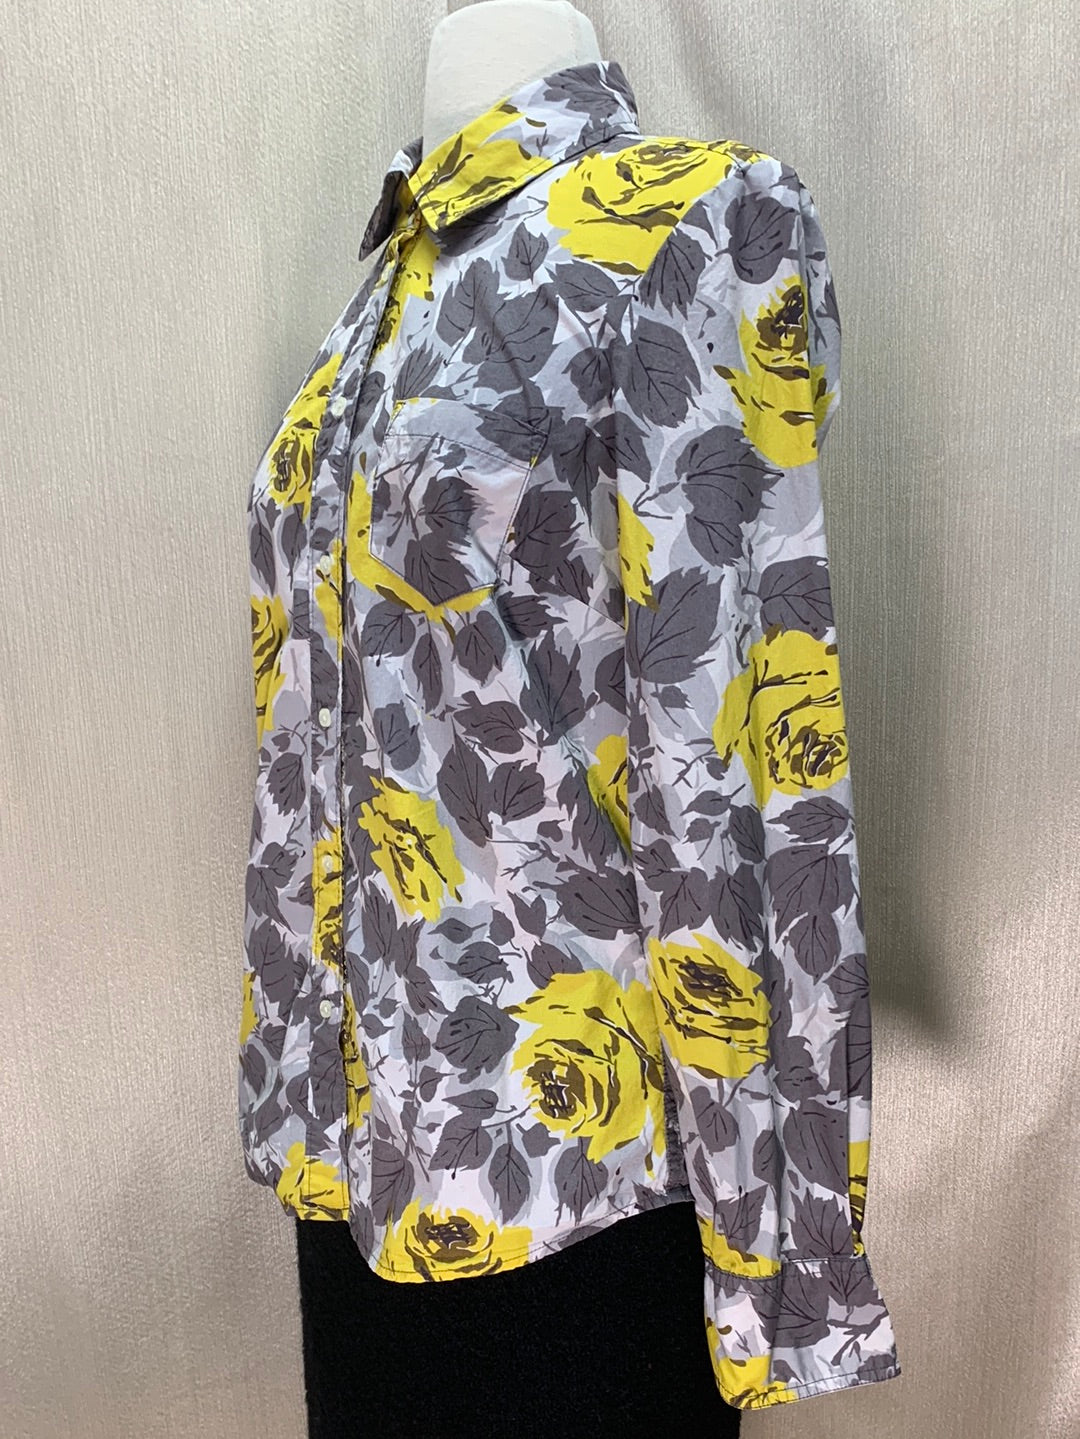 BODEN yellow gray floral 100% Cotton Long Sleeve Button Up Top - US 8